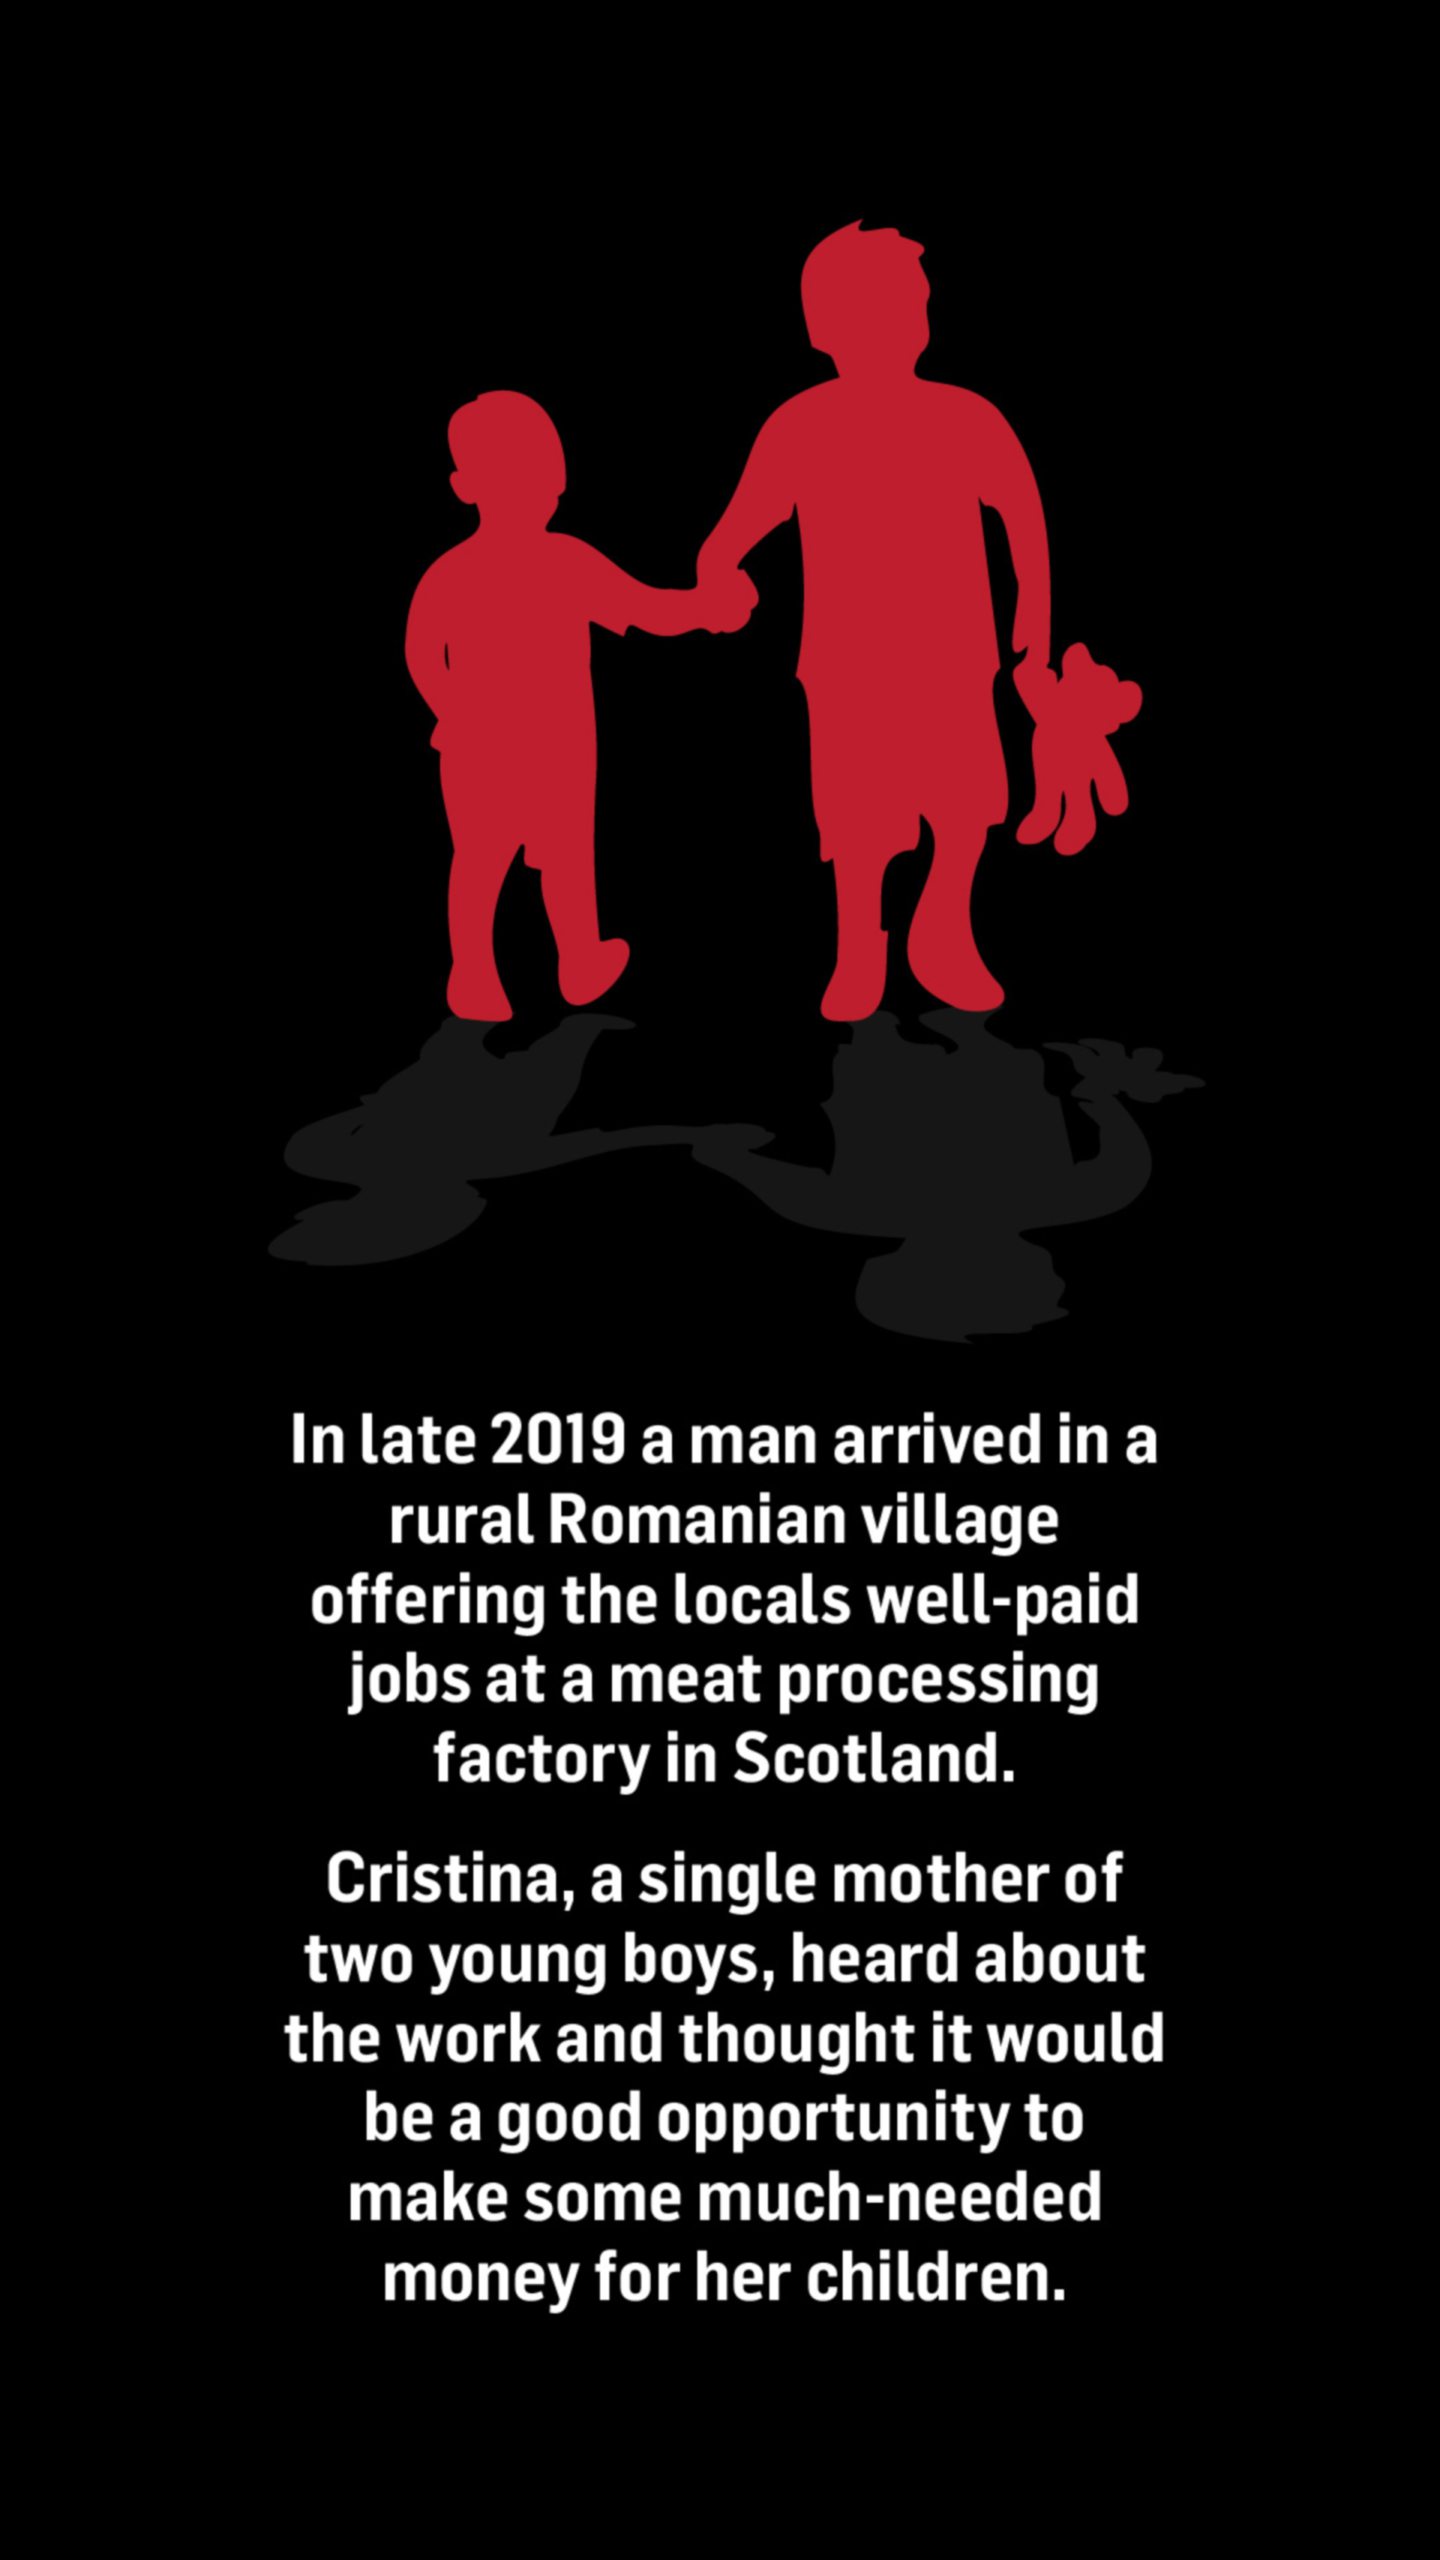 A silhouette of two young children, one holding a teddy bear, with the words below saying: In late 2019 a man arrived in a rural Romanian village offering the locals well-paid jobs at a meat processing factory in Scotland.

Cristina*, a single mother of two young boys, heard about the work and thought it would be a good opportunity to make some much-needed money for her children.